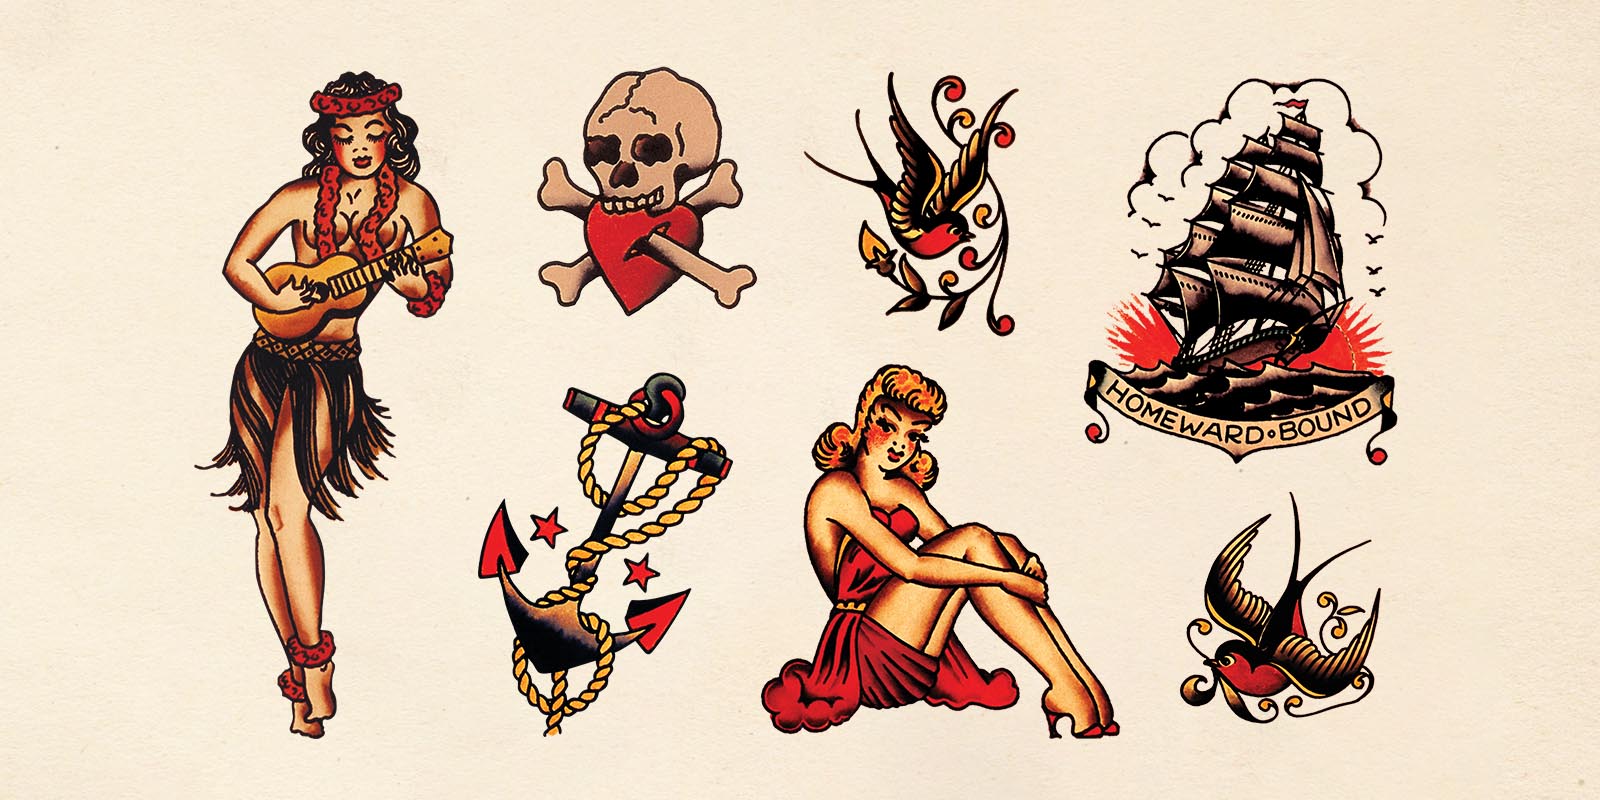 Celebrate 'Sailor Jerry,' who shaped future of tattooing in U.S.